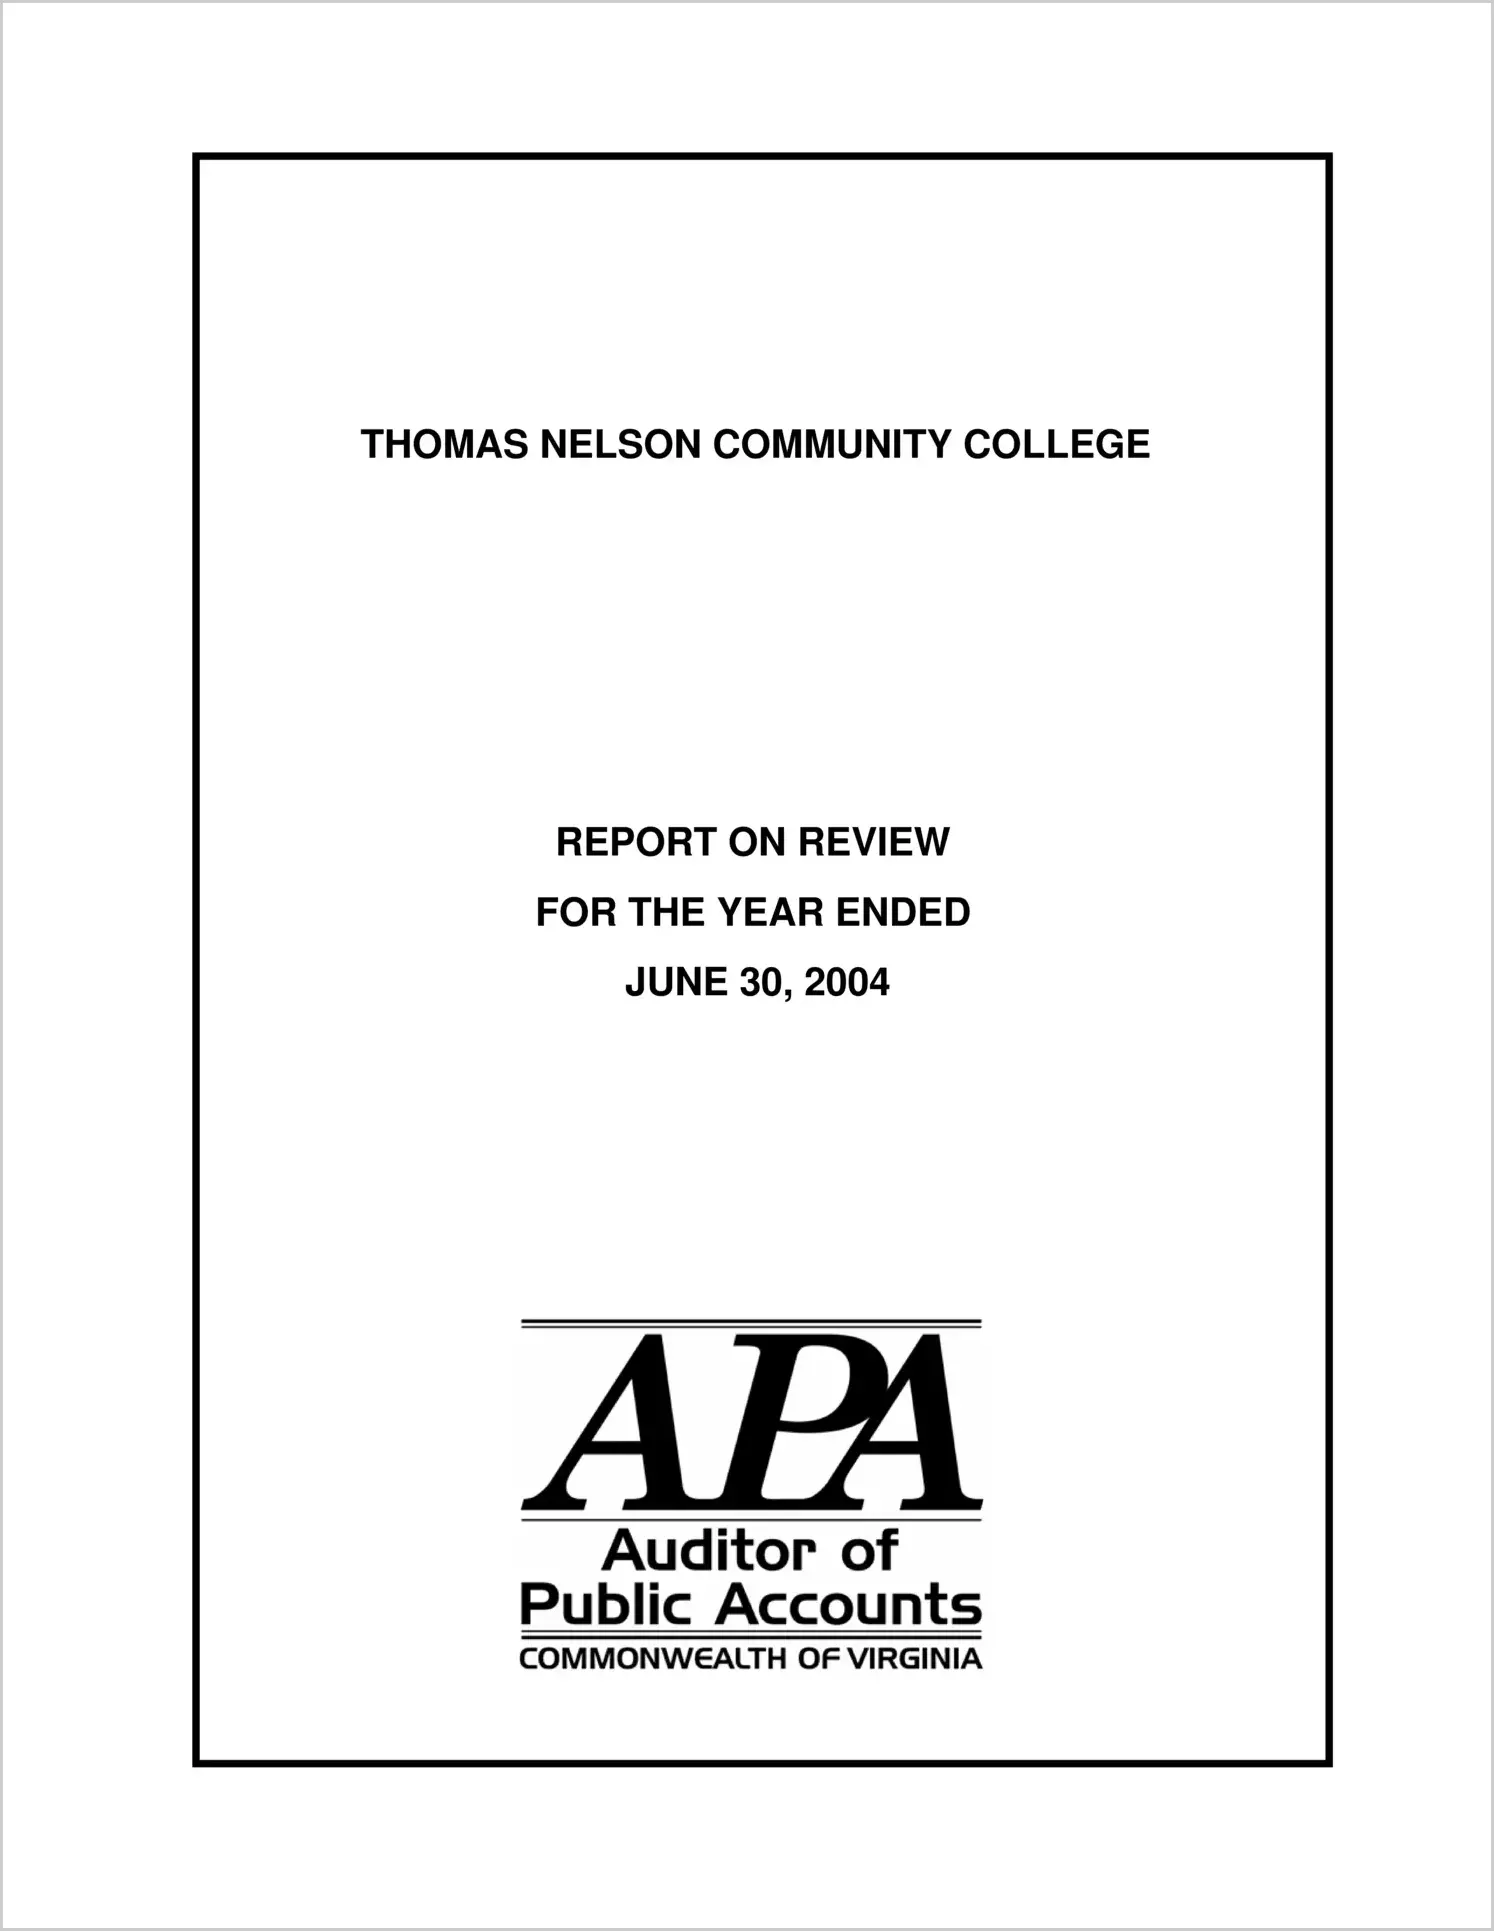 Thomas Nelson Community College Report on review for the year ended June 30, 2004